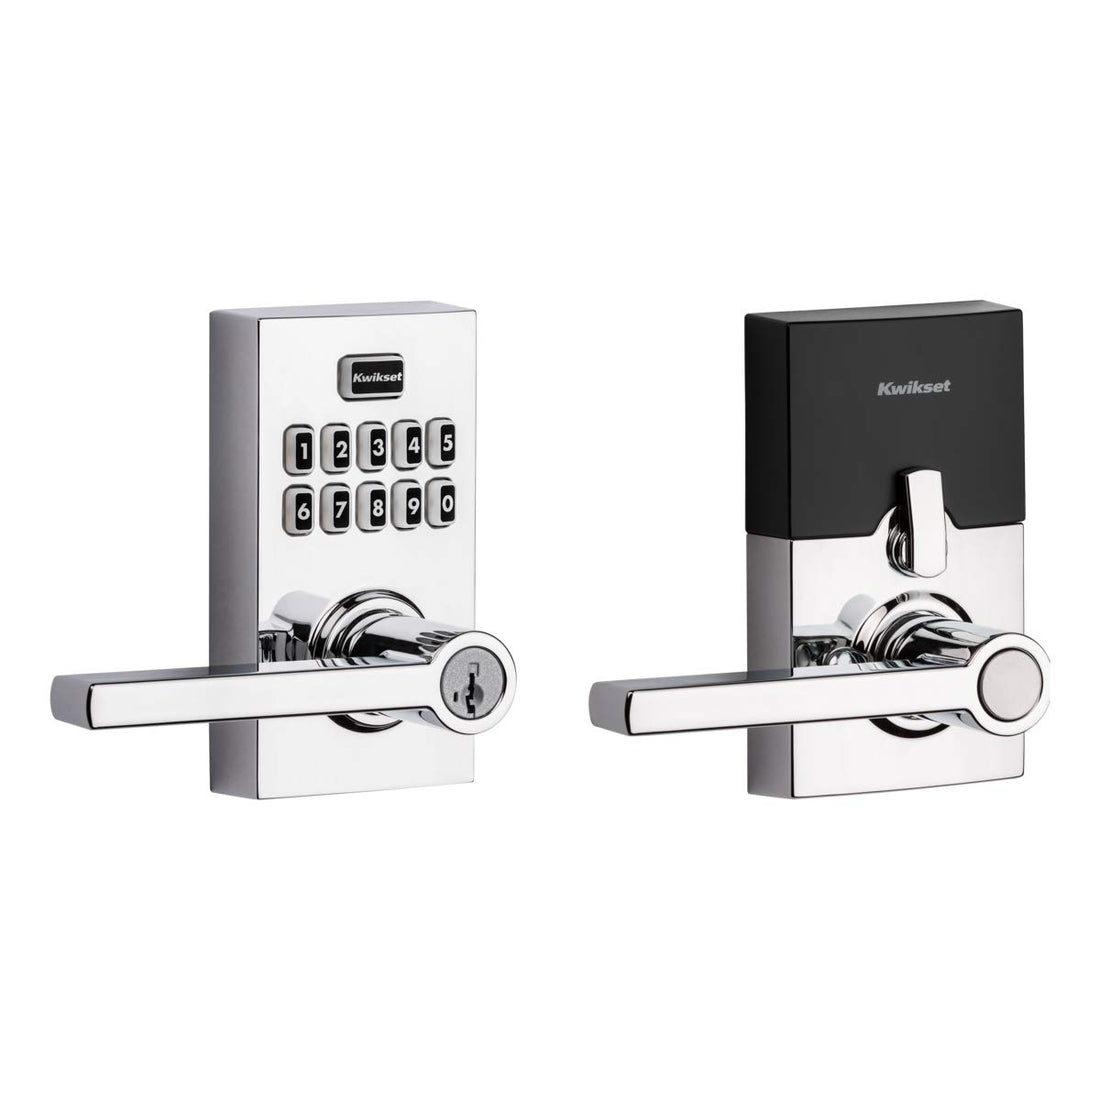 Kwikset 99170-005 SmartCode 917 Keyless Entry Contemporary Residential Keypad Electronic Lever Lock Deadbolt Alternative with Halifax Door Handle and SmartKey Security, Polished Chrome